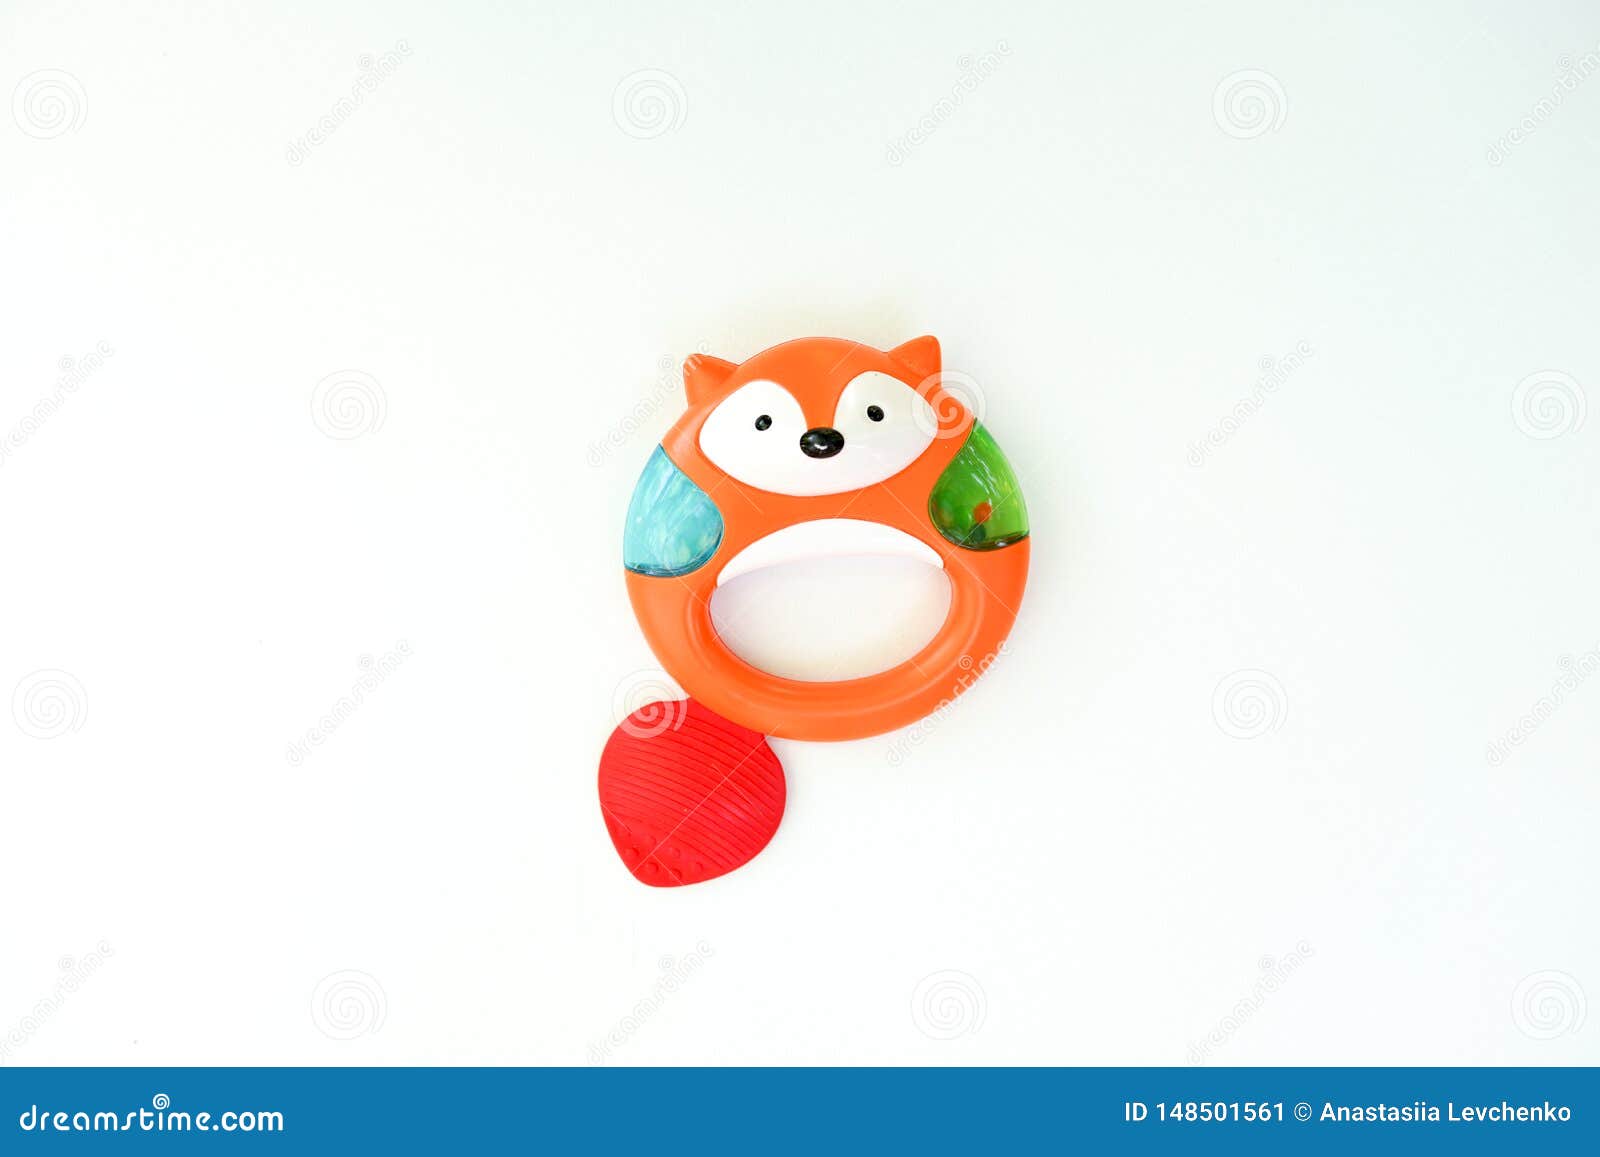 Baby Toy Fox. Toys for Newborn Child Stock Image - Image of gift